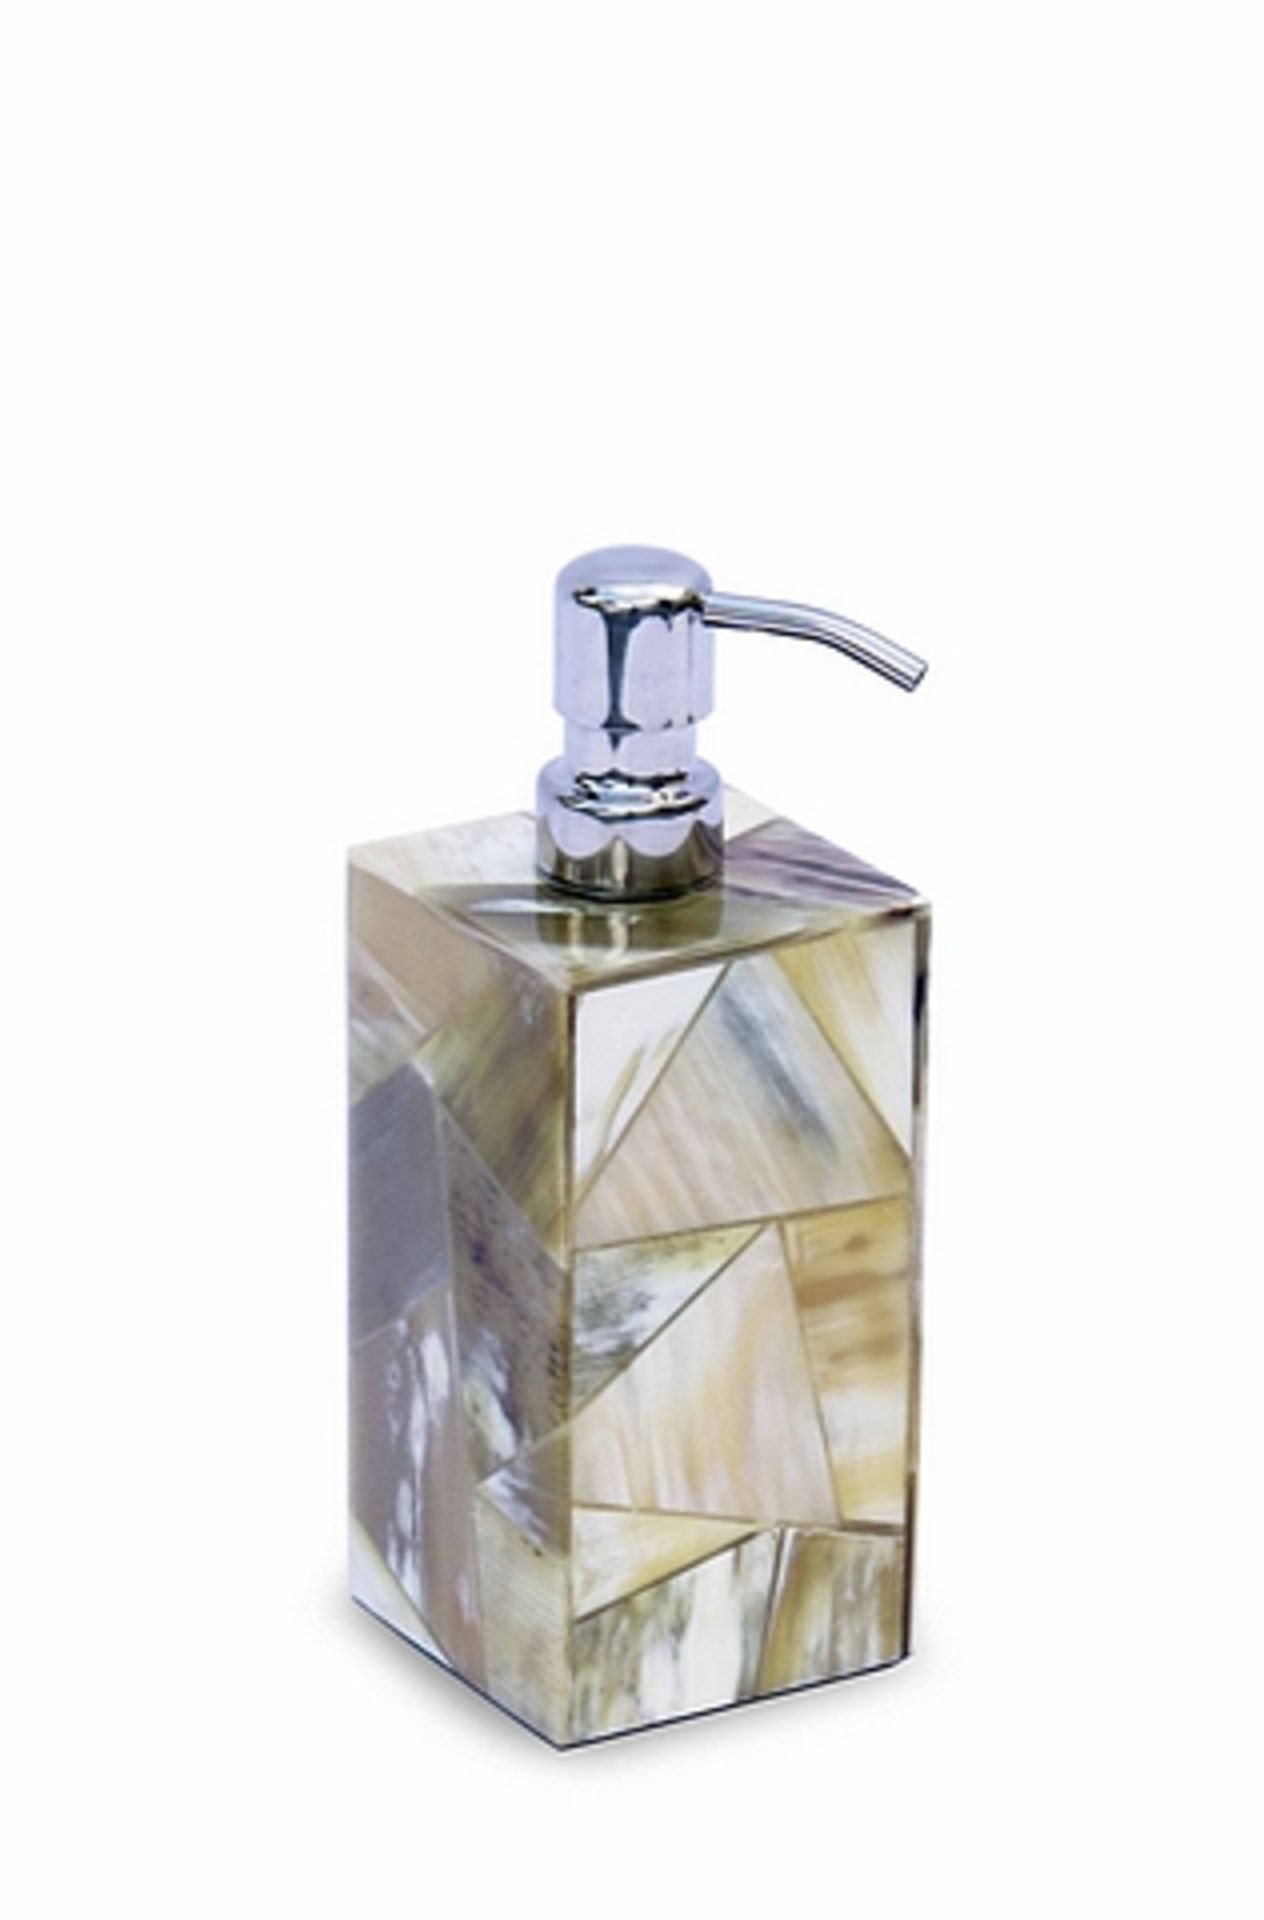 Soap dispenser spa soap dispenser horn and inside walnut finish. Highly desirable and a piece that